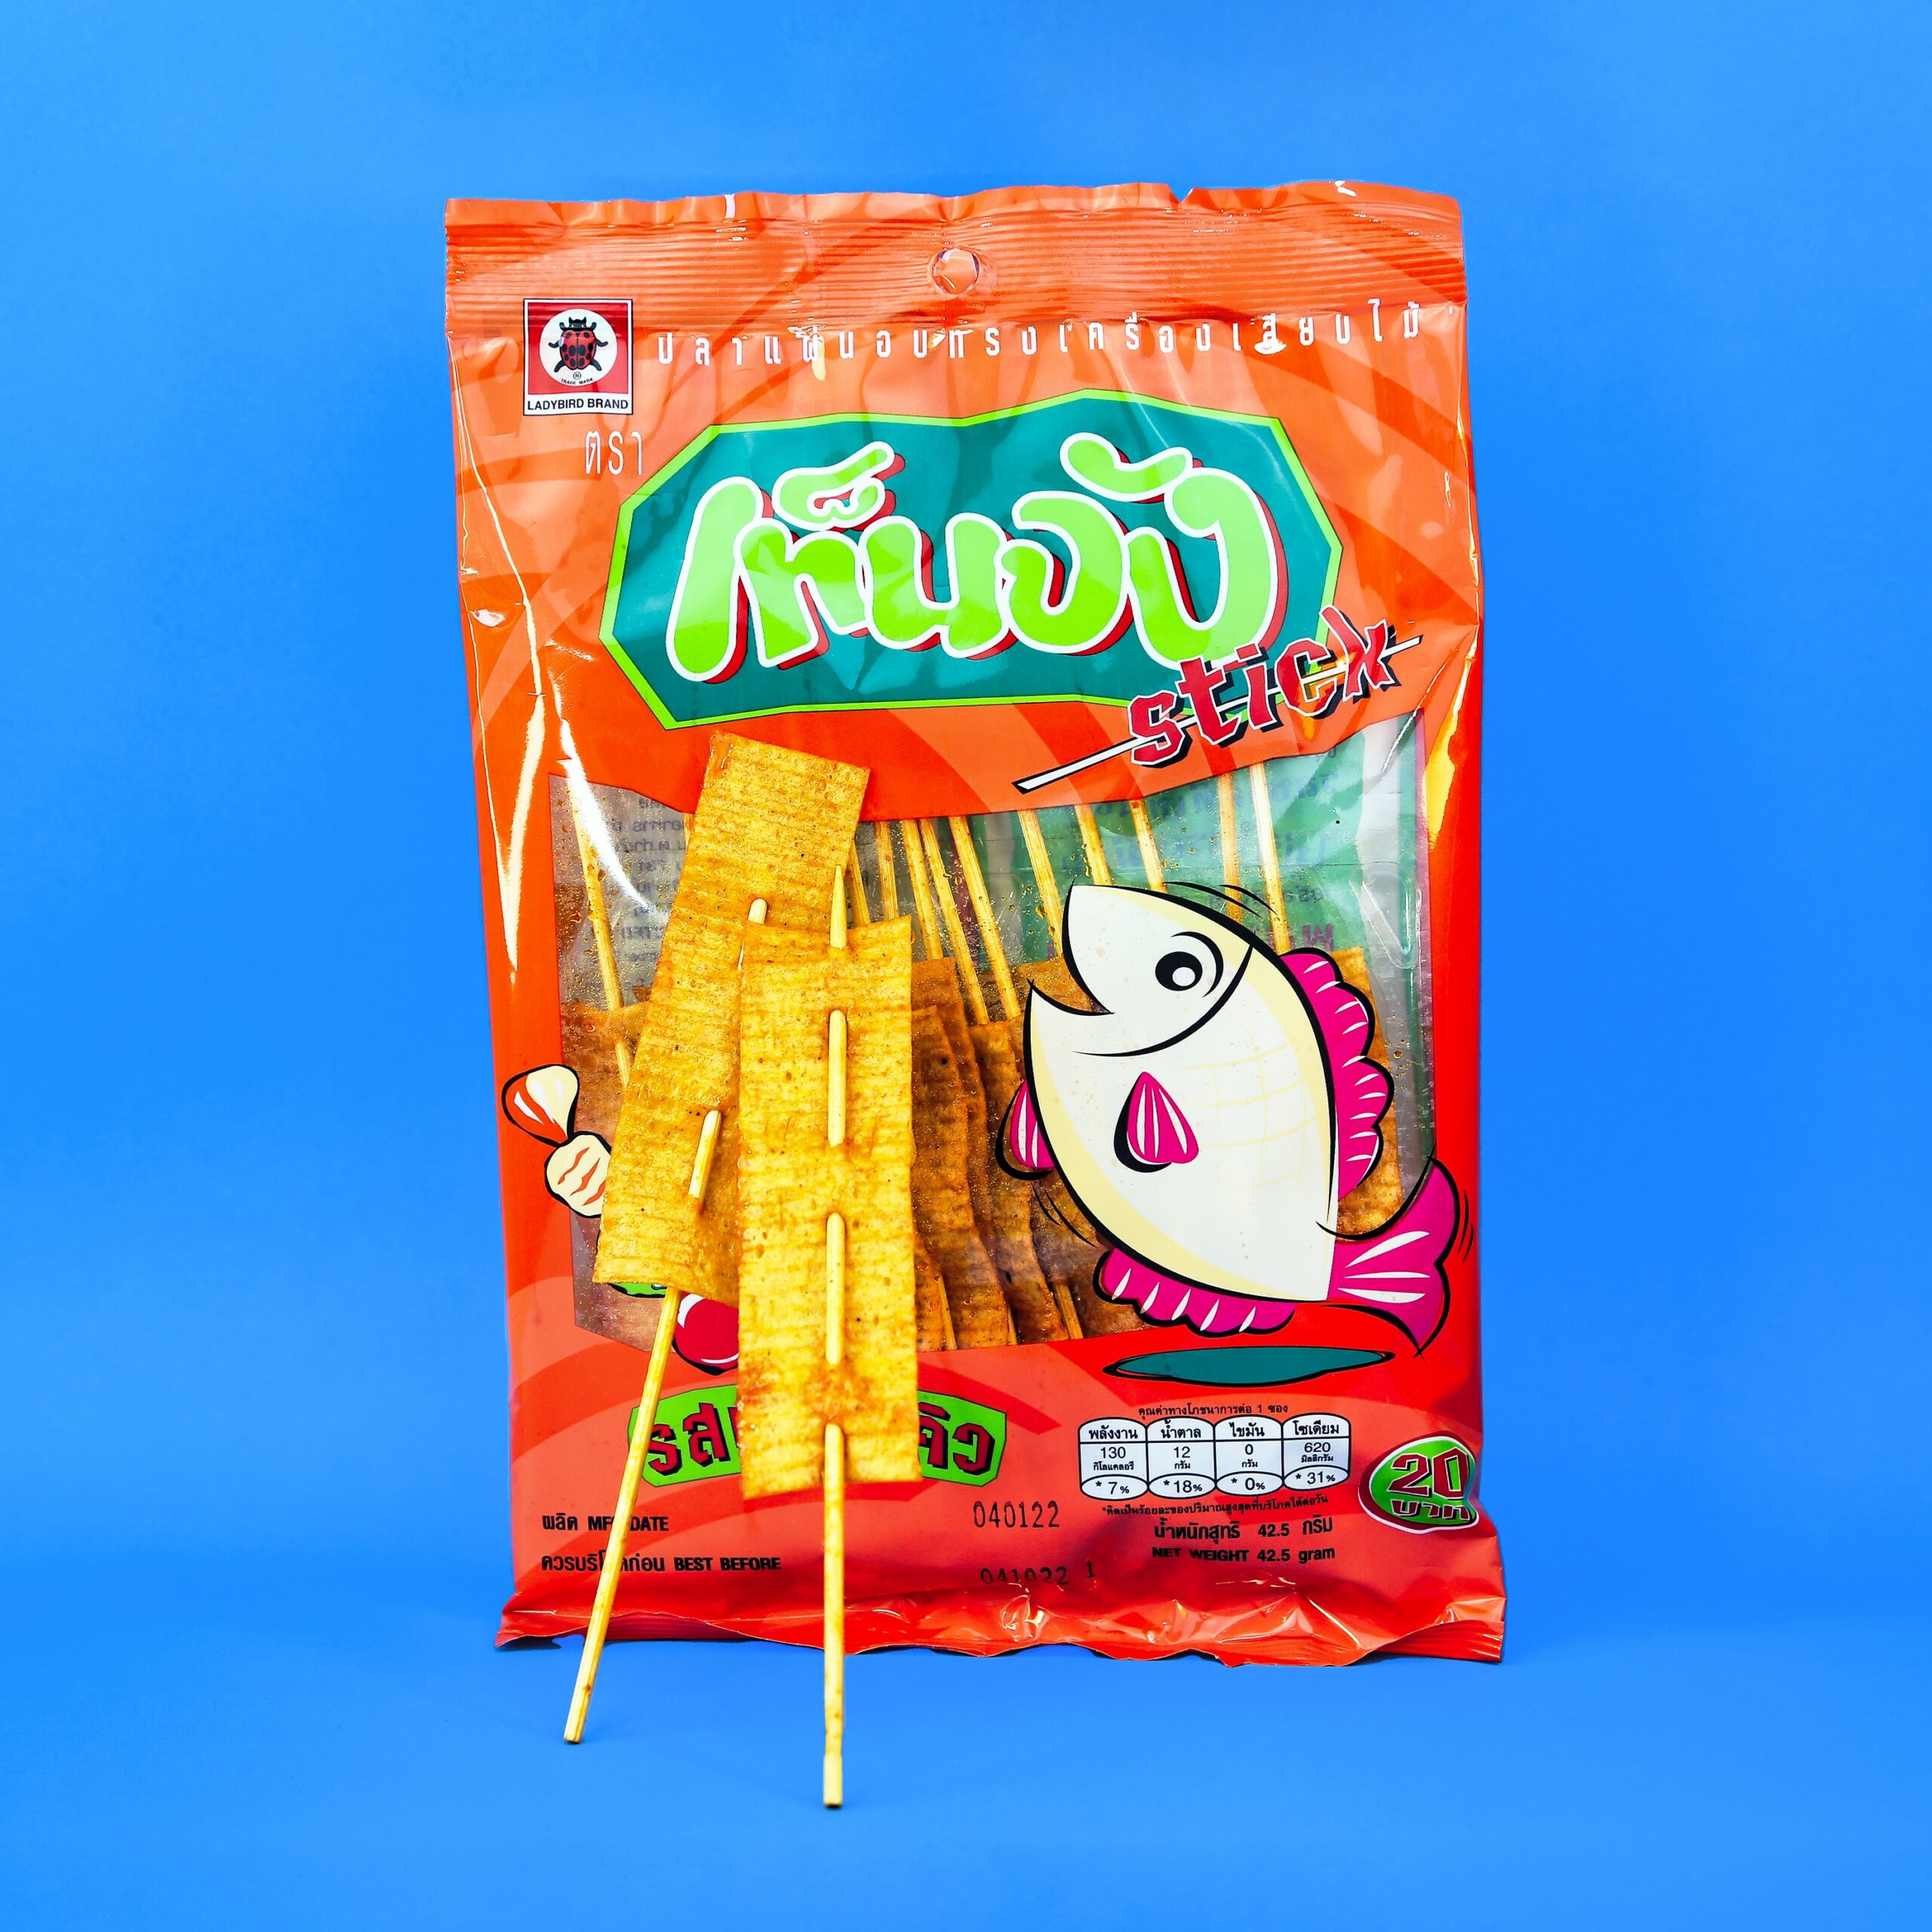 Ten Jang BarBQ fish snack in sticks. Classic Thai snacks with an orange packaging and a big fish in front